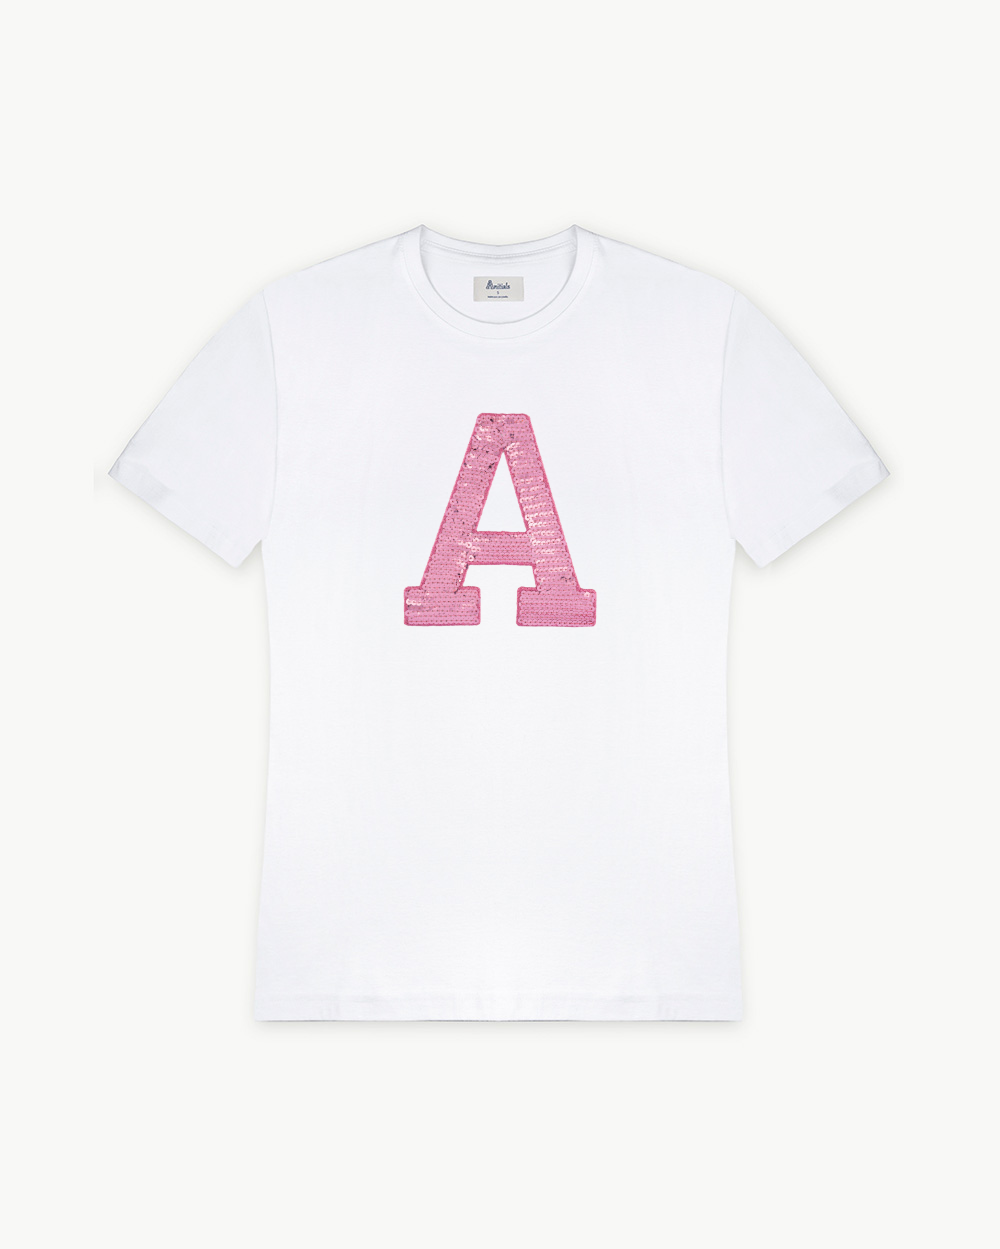 WHITE T-SHIRT | INITIAL PINK SEQUINS